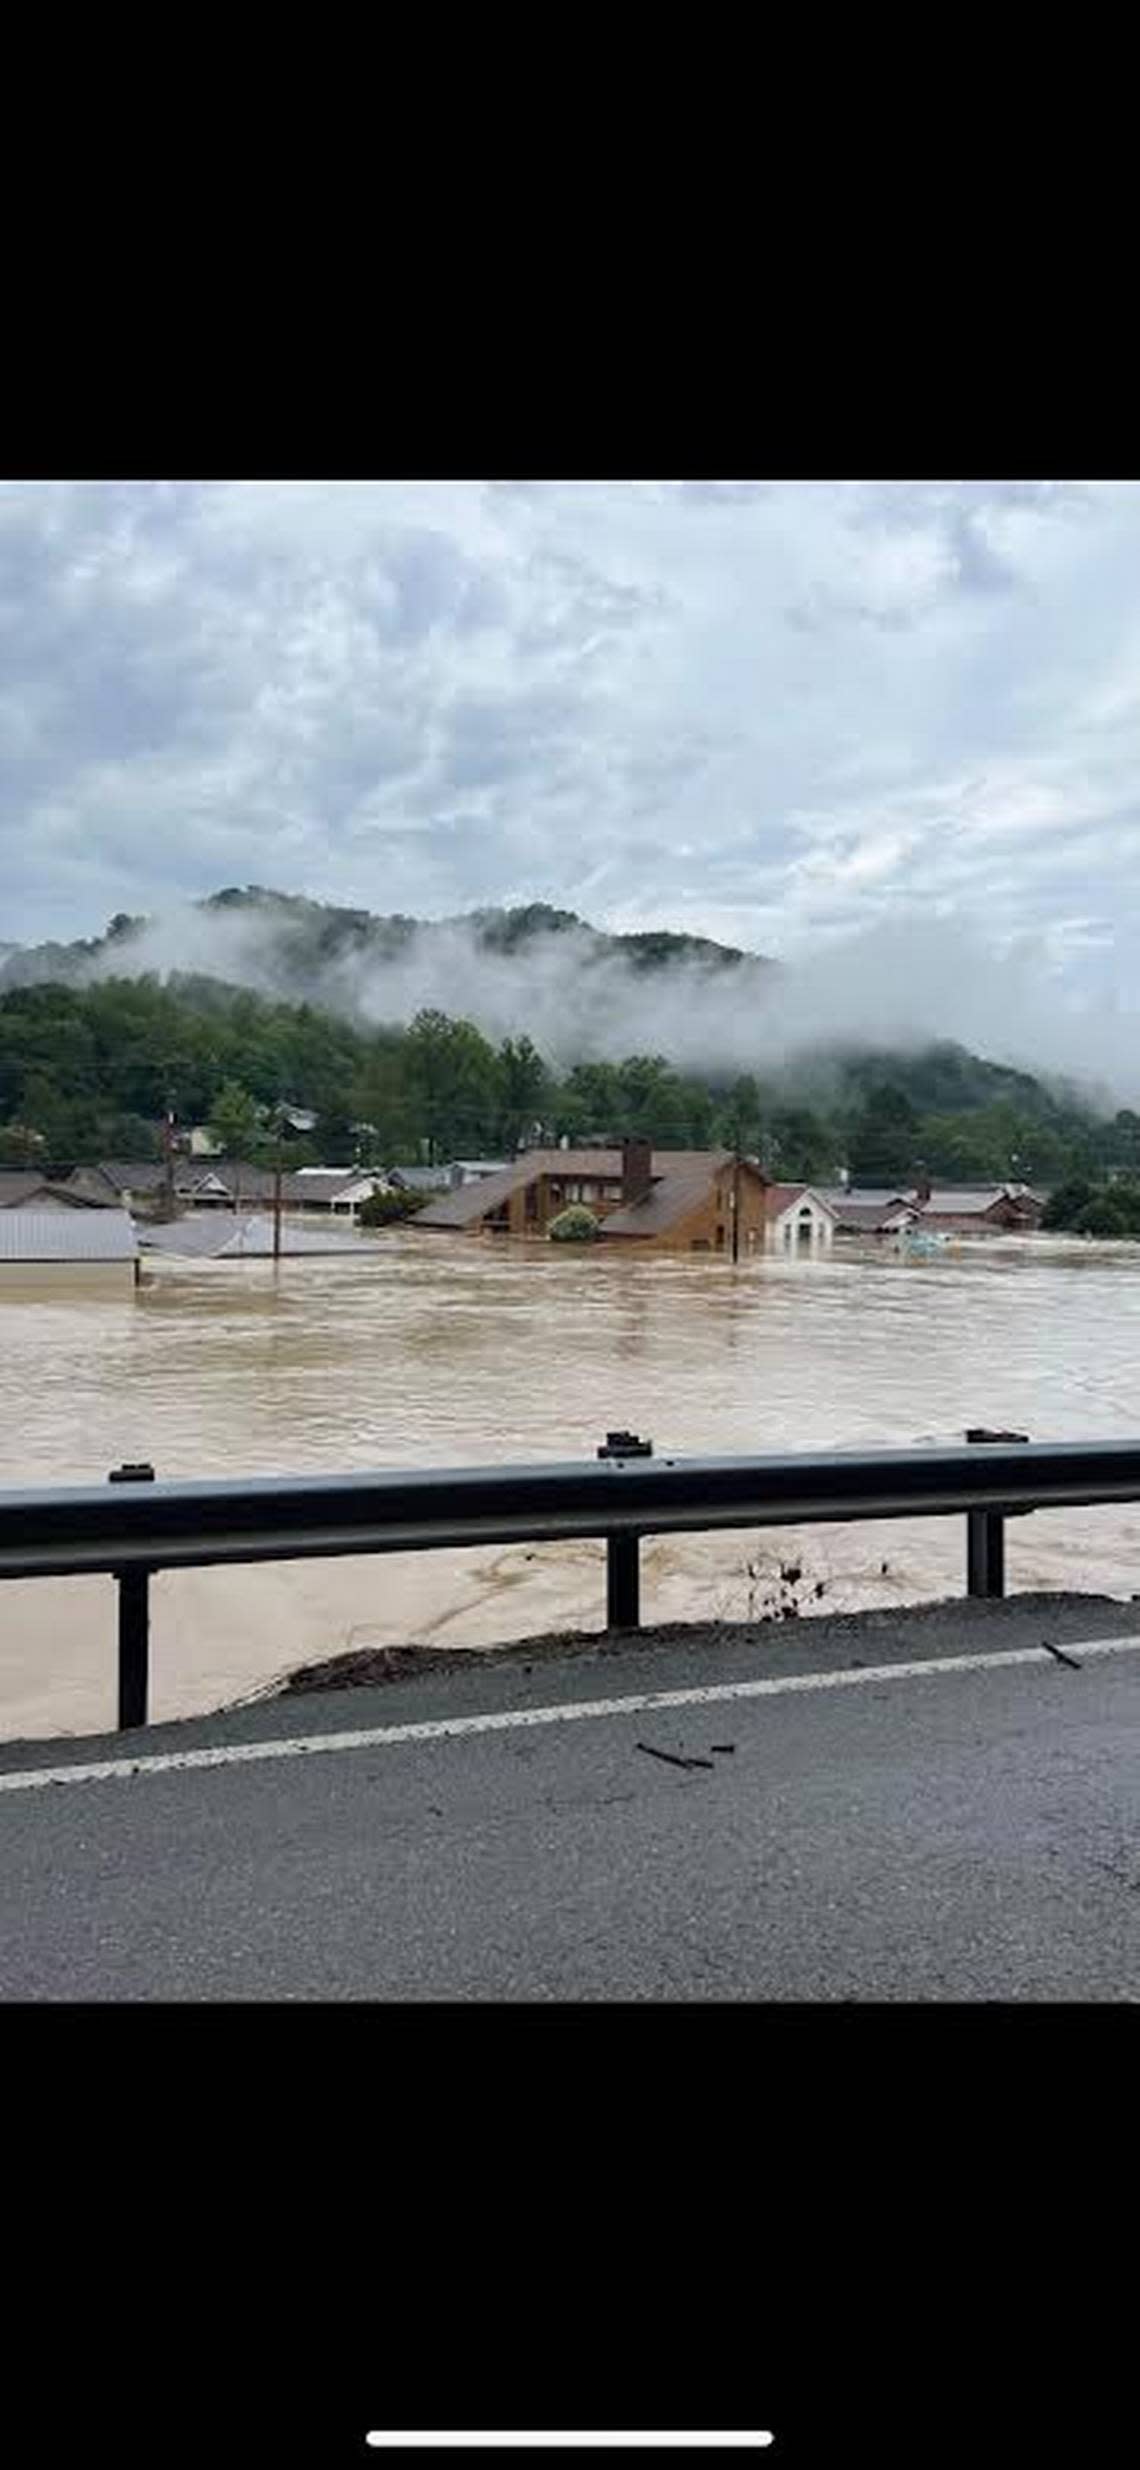 Homes and businesses in downtown Whitesburg were under water on July 28, 2022.